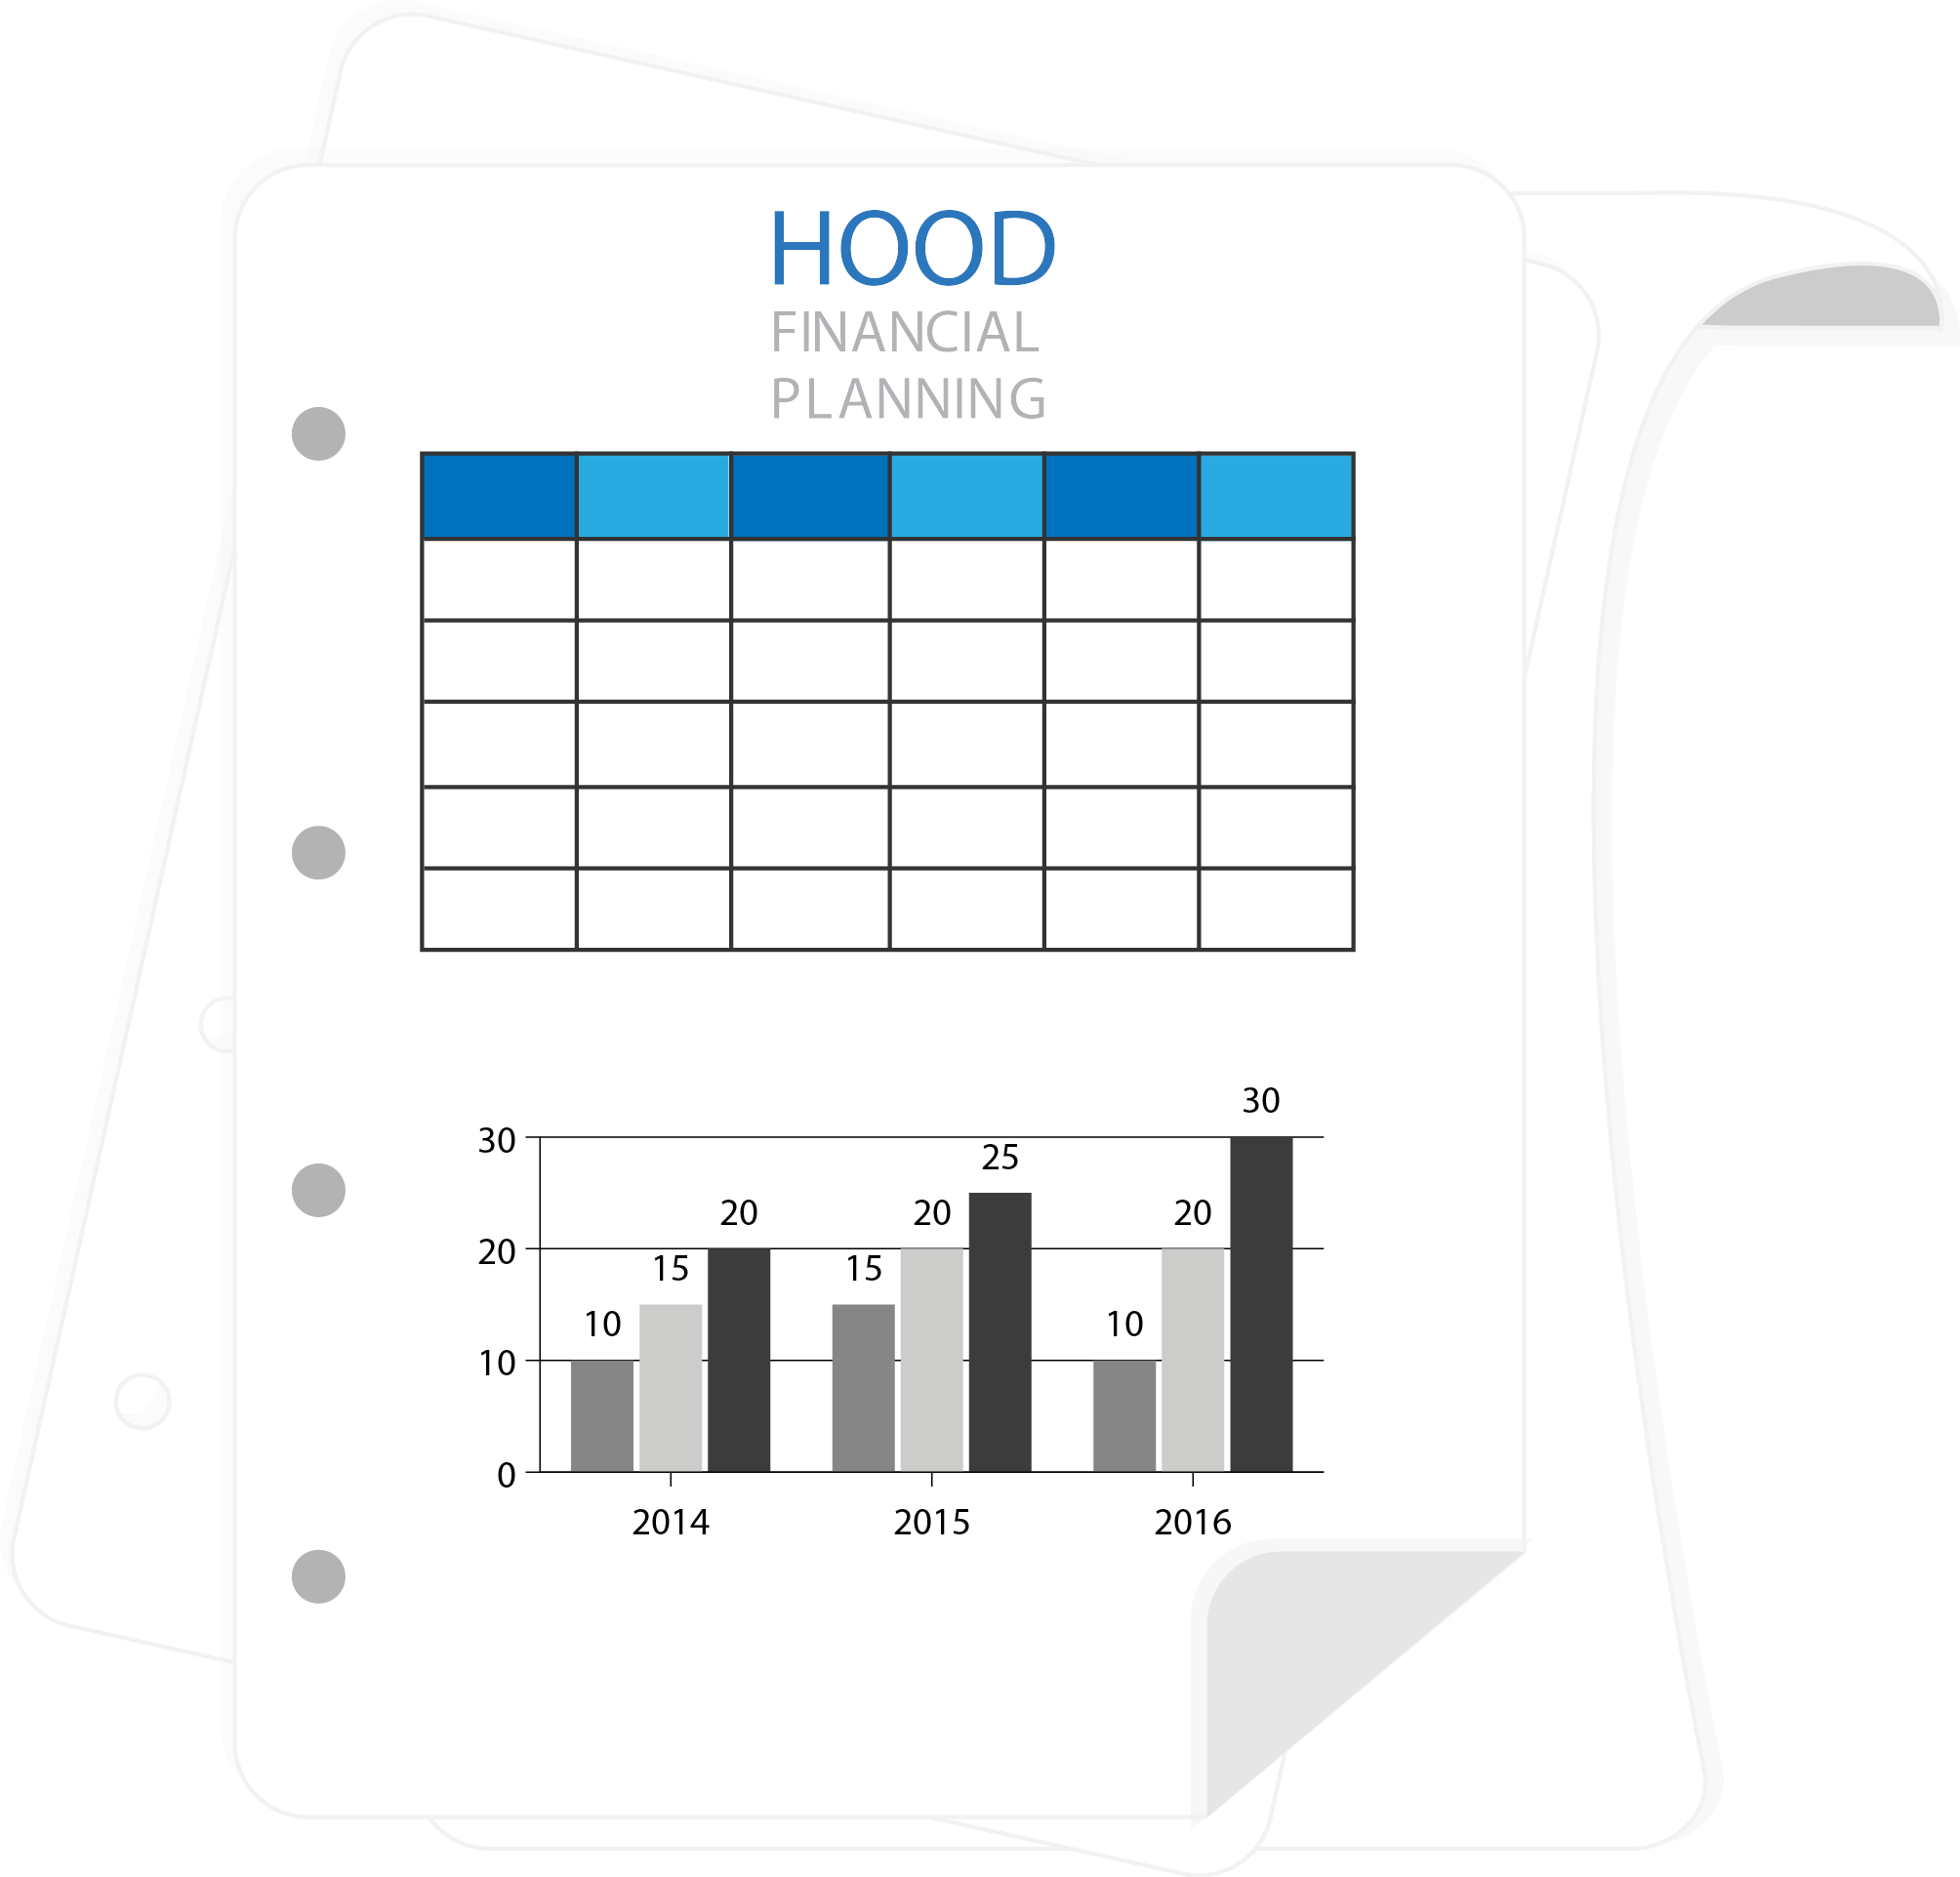 Hood Financial Planning Manchester spreadsheet icon image